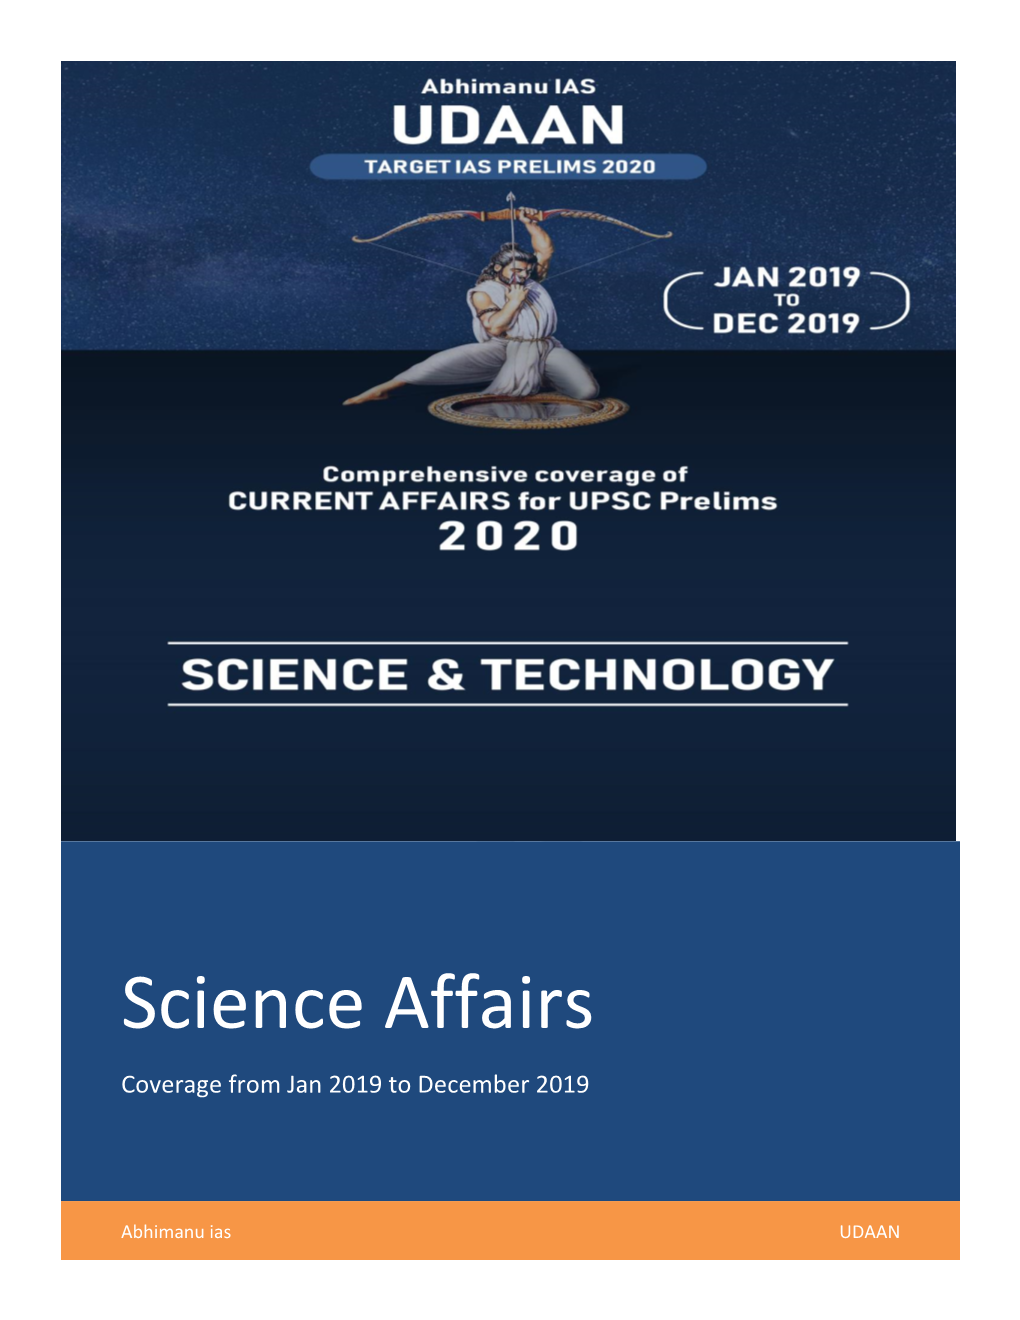 Science Affairs Coverage from Jan 2019 to December 2019